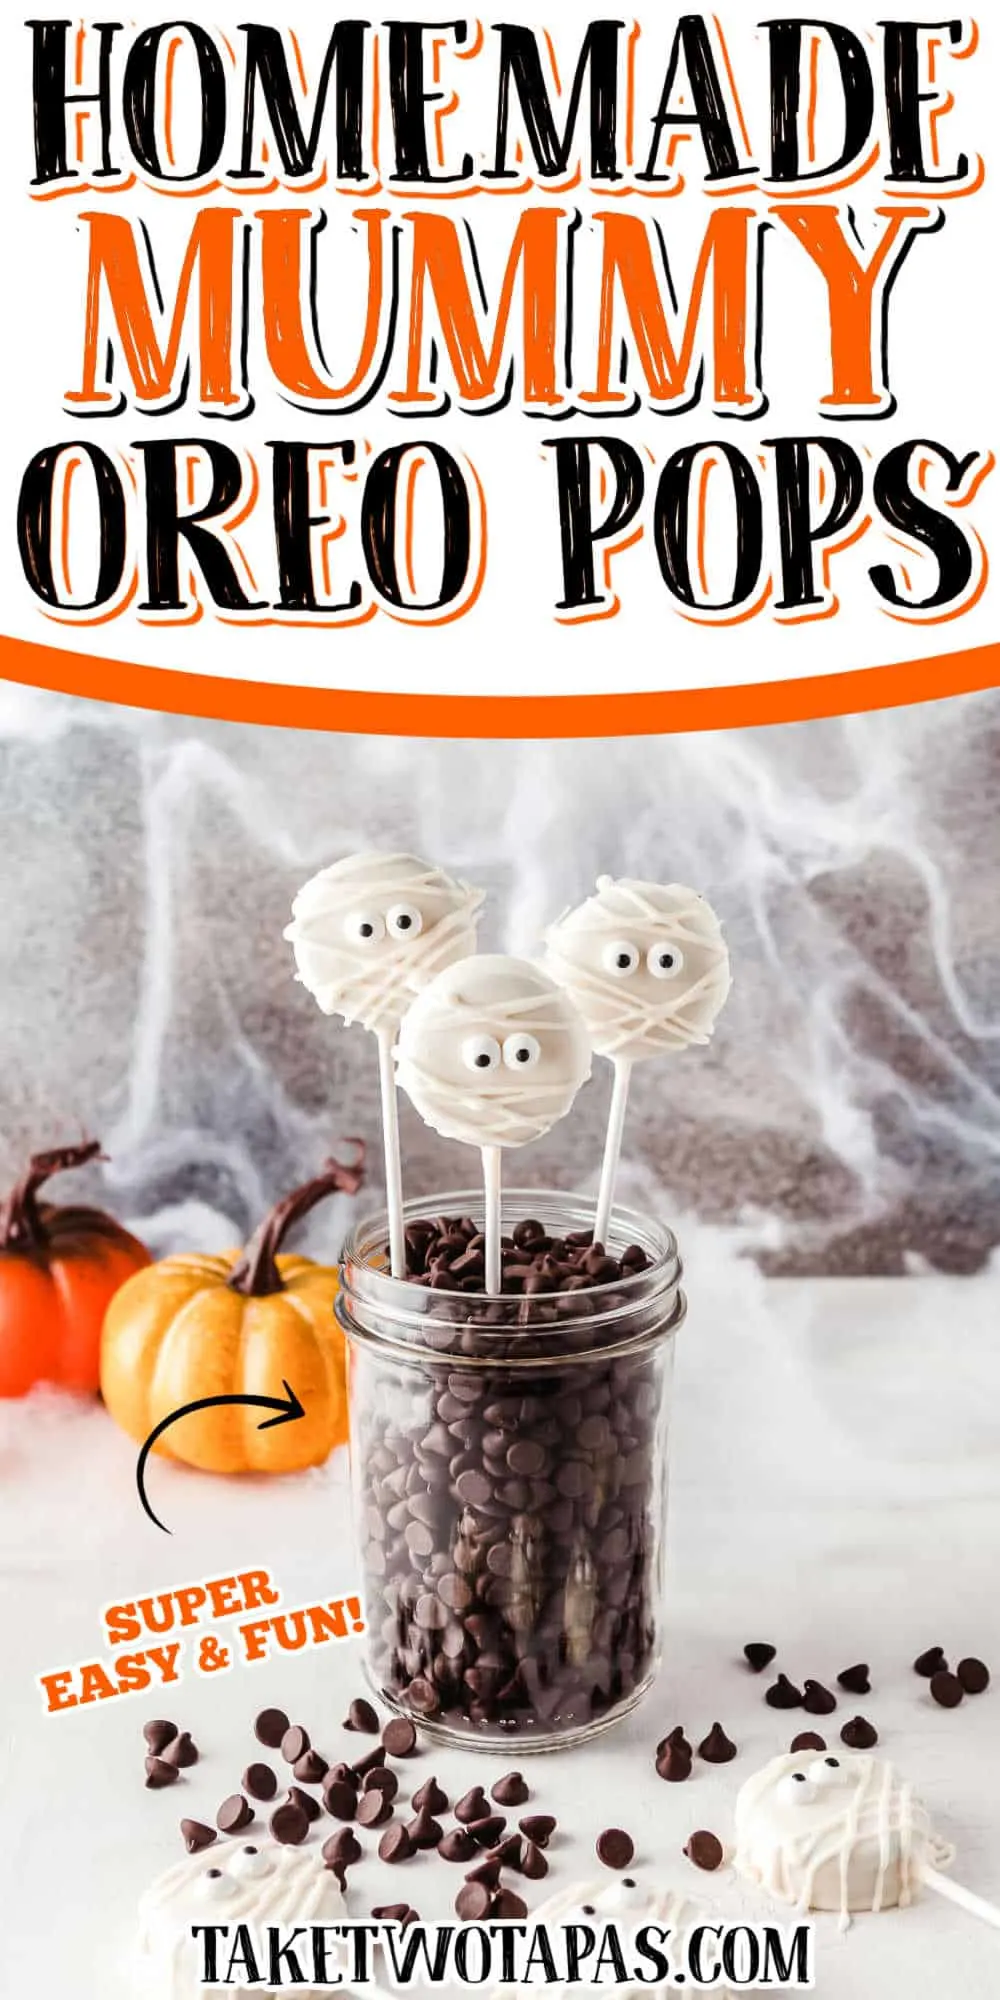 lollipops with text "halloween mummy oreo pops"